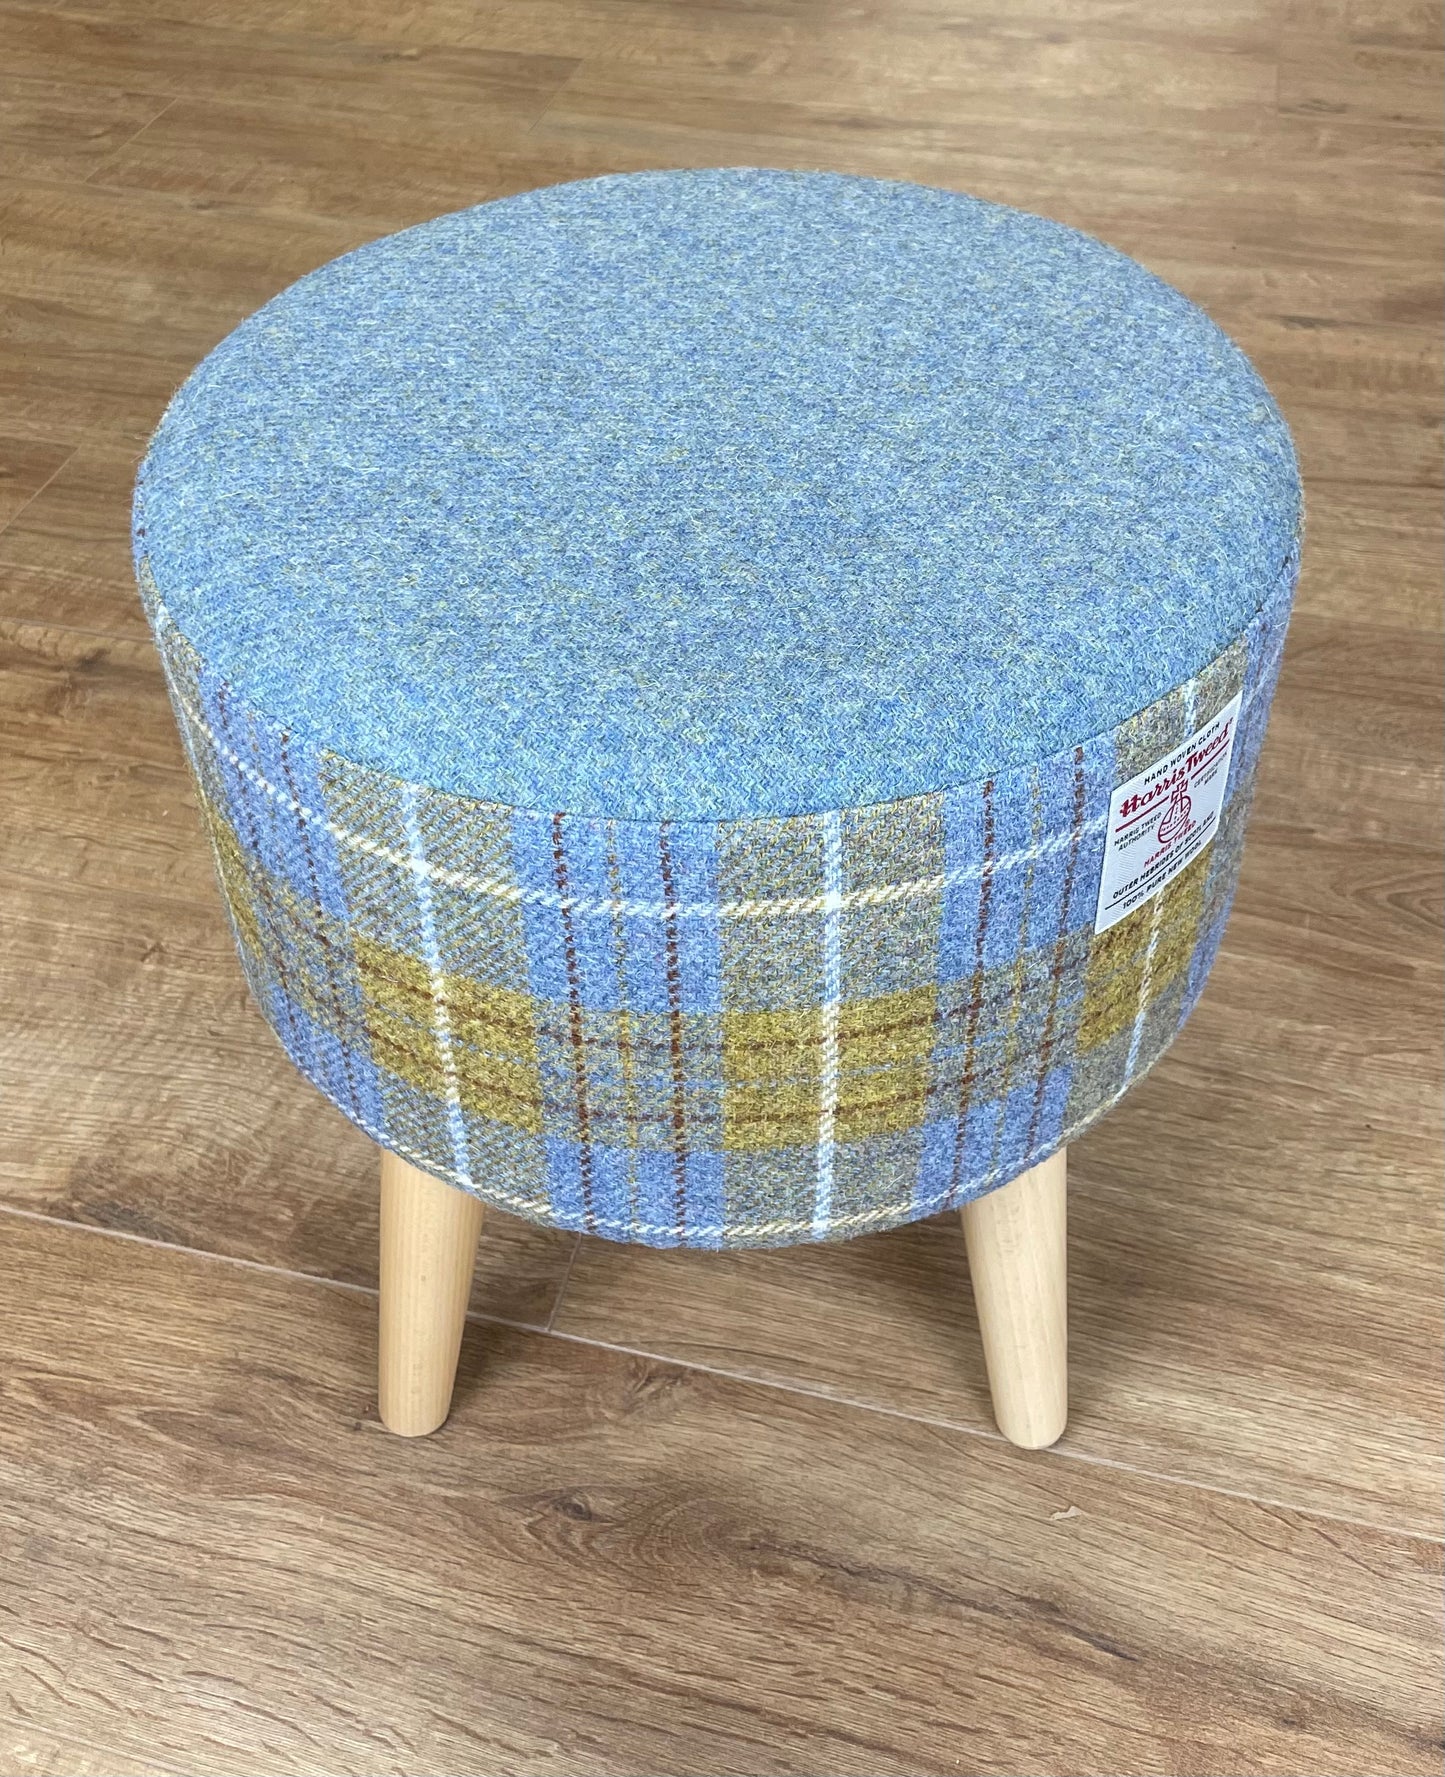 Light Blue and Tartan Harris Tweed Round Footstool with Varnished Wooden Legs